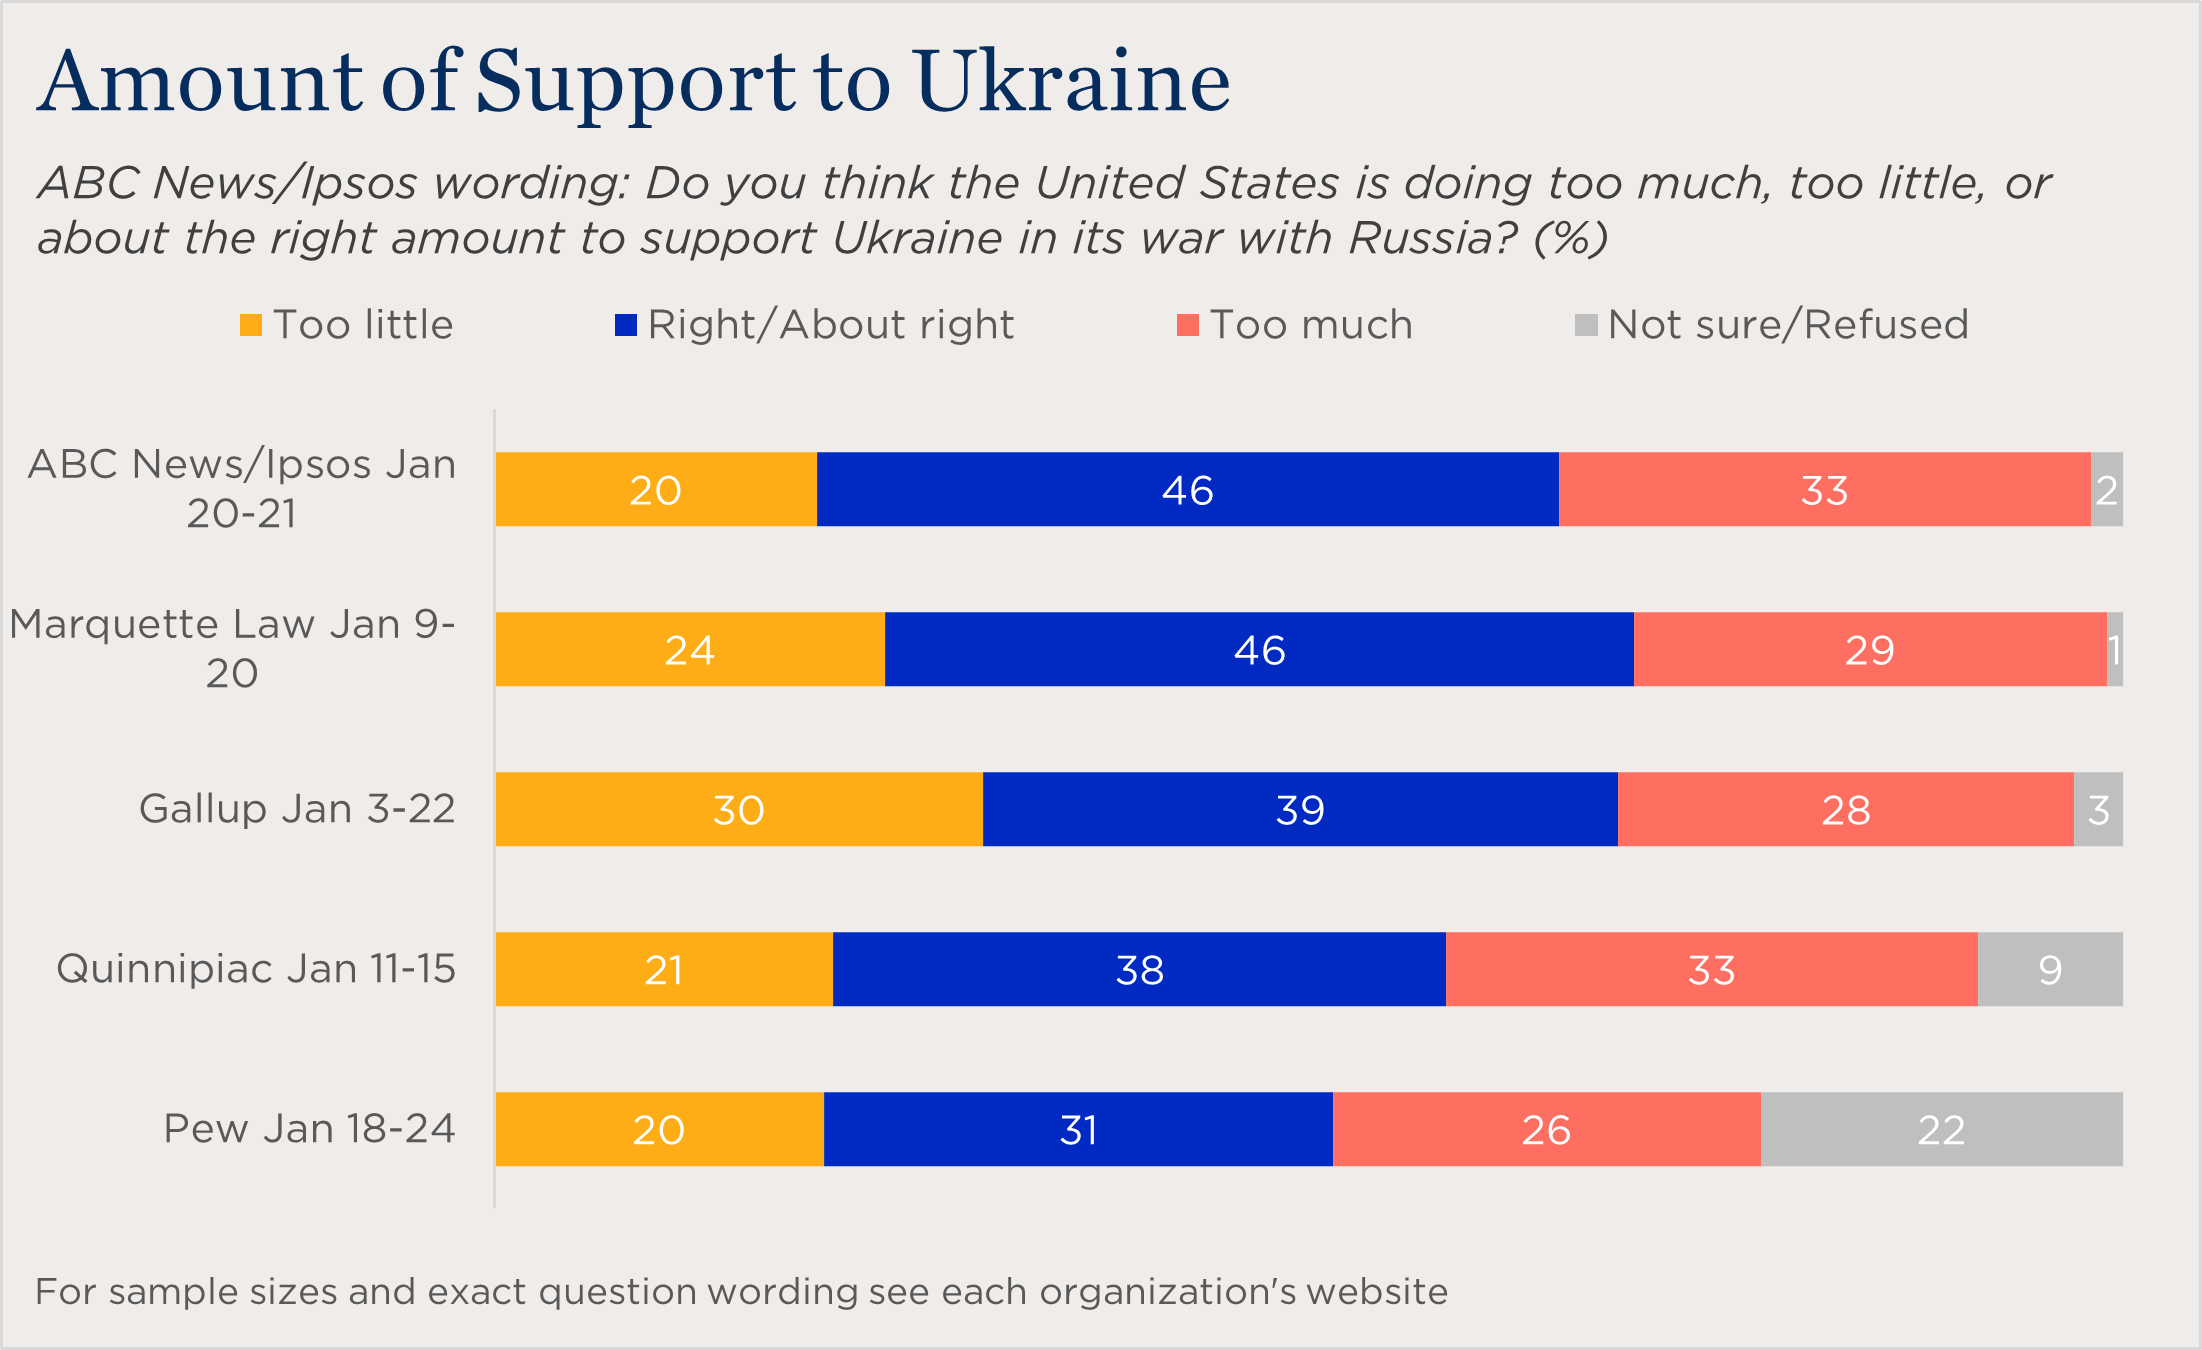 "bar chart showing views on the amount of US support to Ukraine"